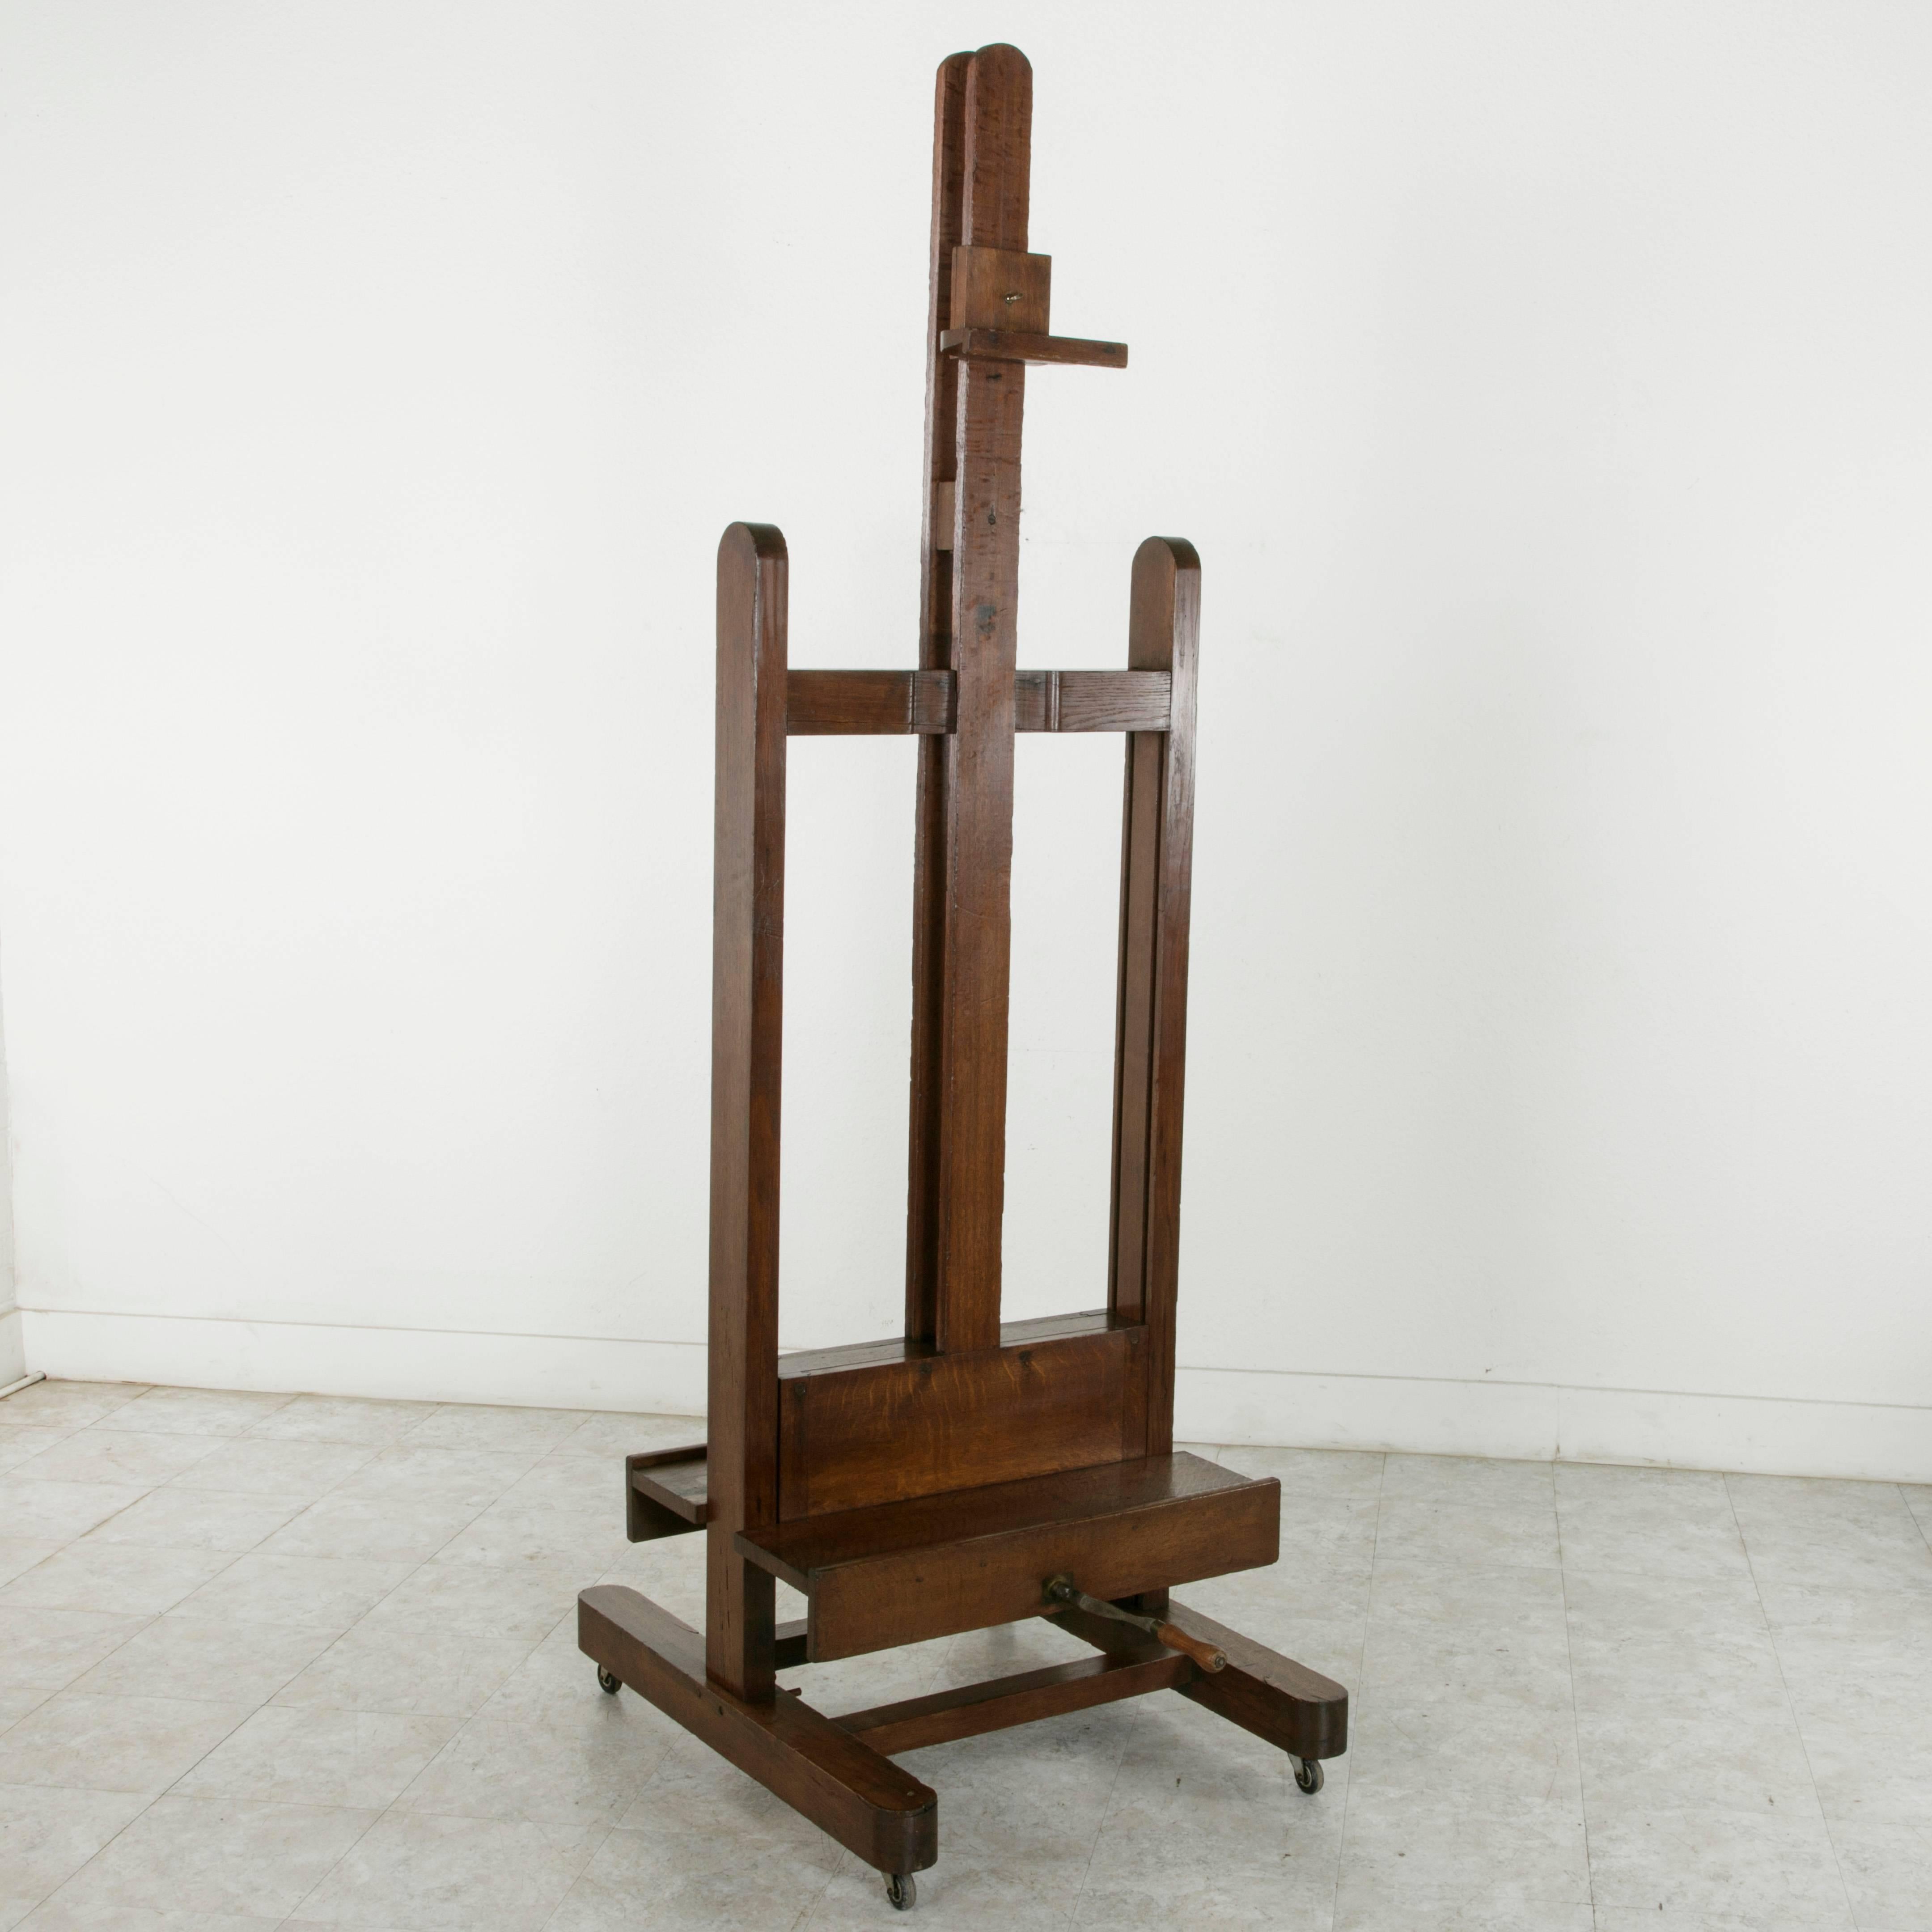 This very large French oak floor easel from the early twentieth century is a rare find.  It is double faced, allowing for display of a painting on each side.  Its iron and wooden crank allows for an adjustable height ranging from 84 to an amazing